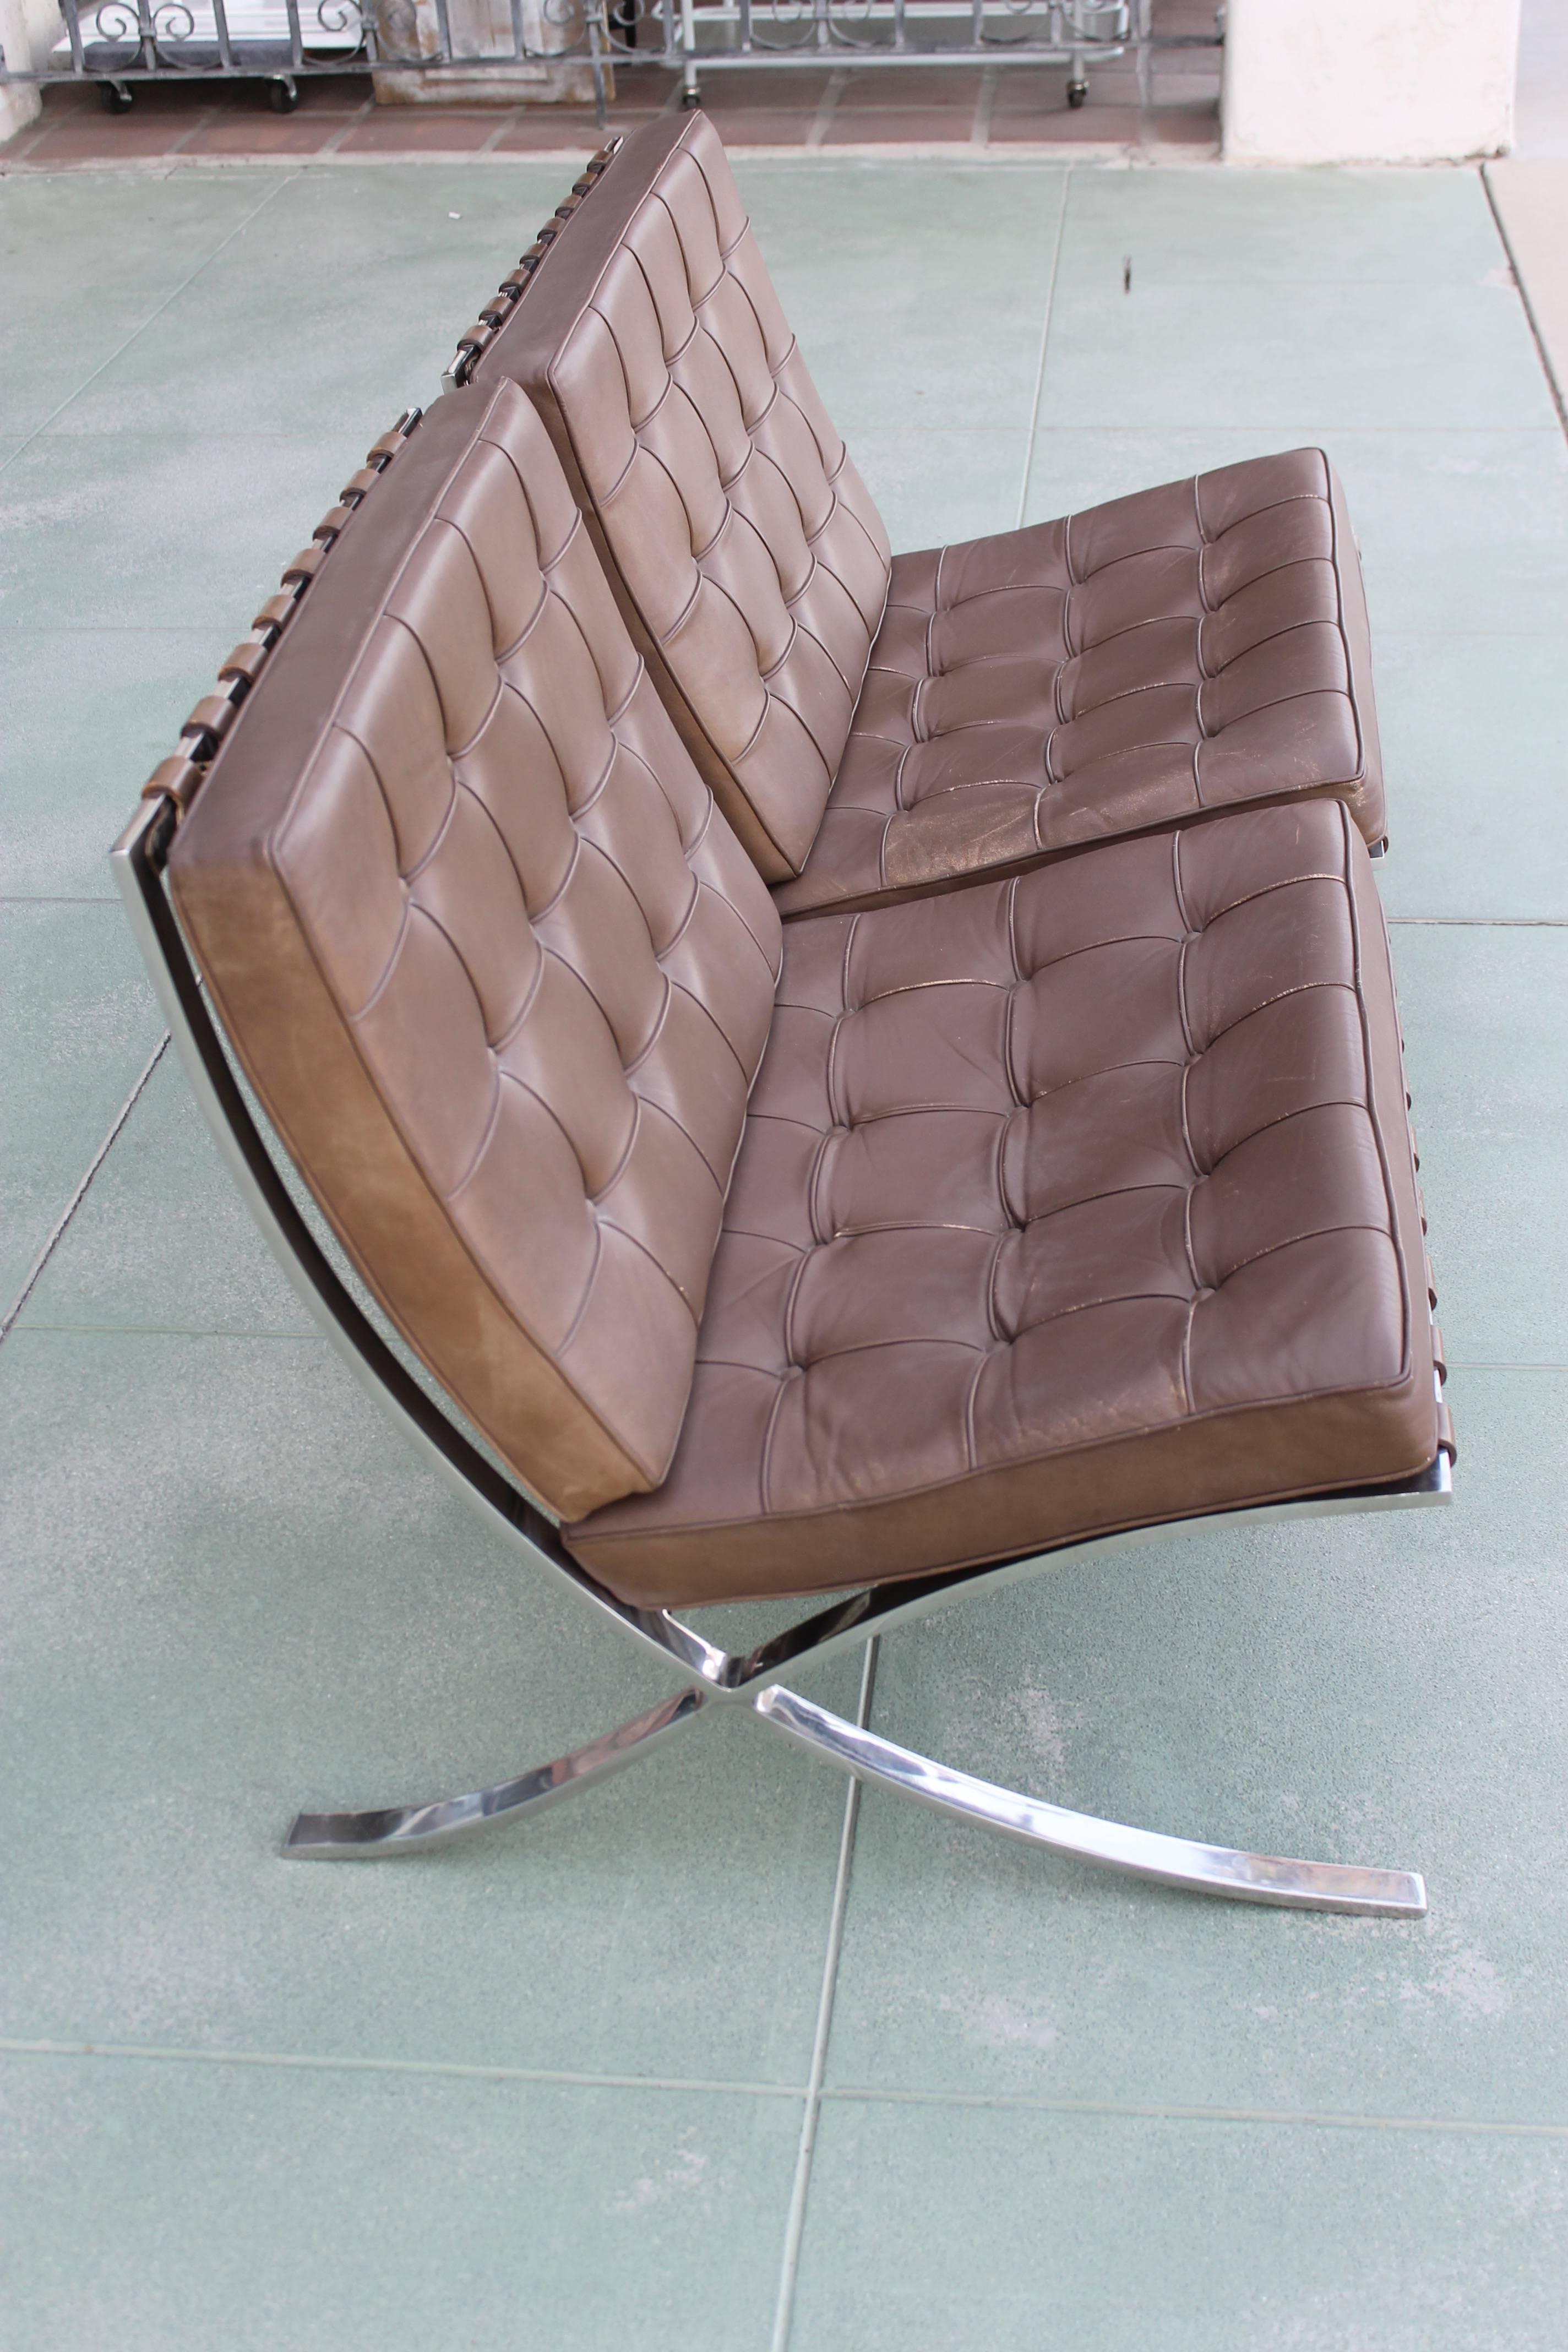 Pair of Barcelona chairs by Knoll in a brown leather. Chairs have Knoll labels and one of them has a date of 1974. Chair frame measures 29.25